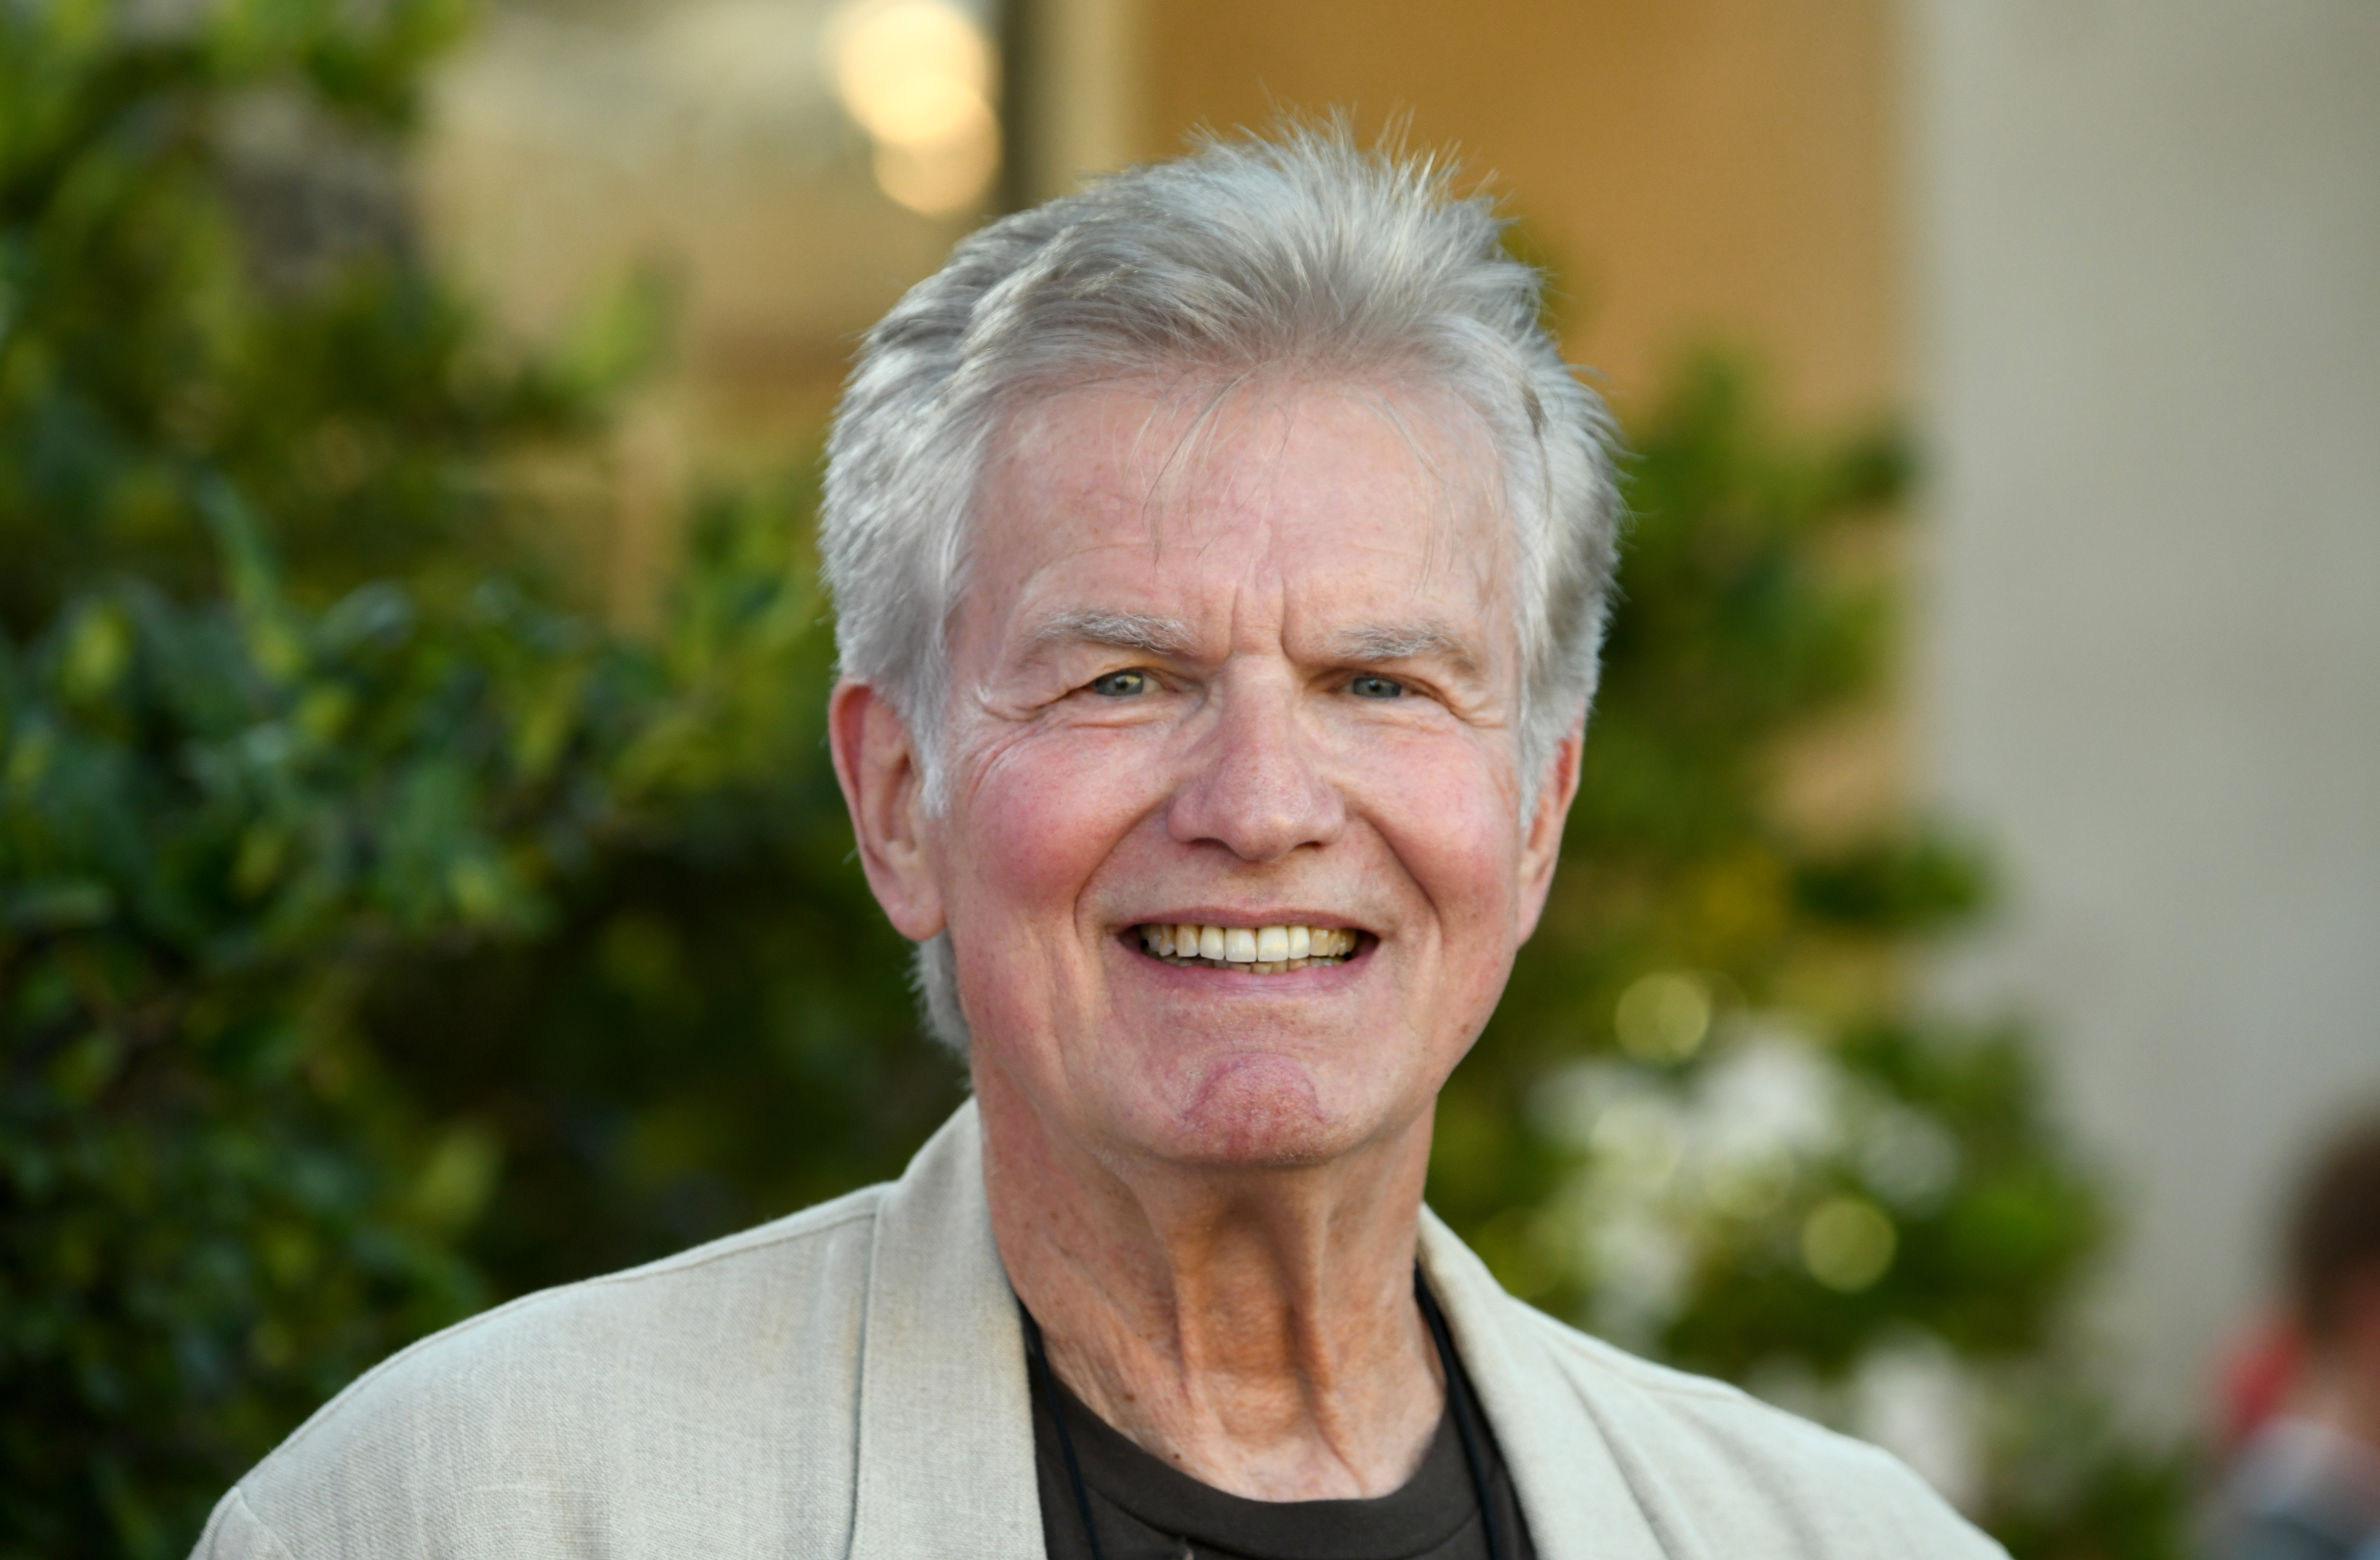 Actor Kent McCord attends the 2019 Festival of Arts Celebrity Benefit Event on August 24, 2019 in Laguna Beach, California. | Photo: Getty Images